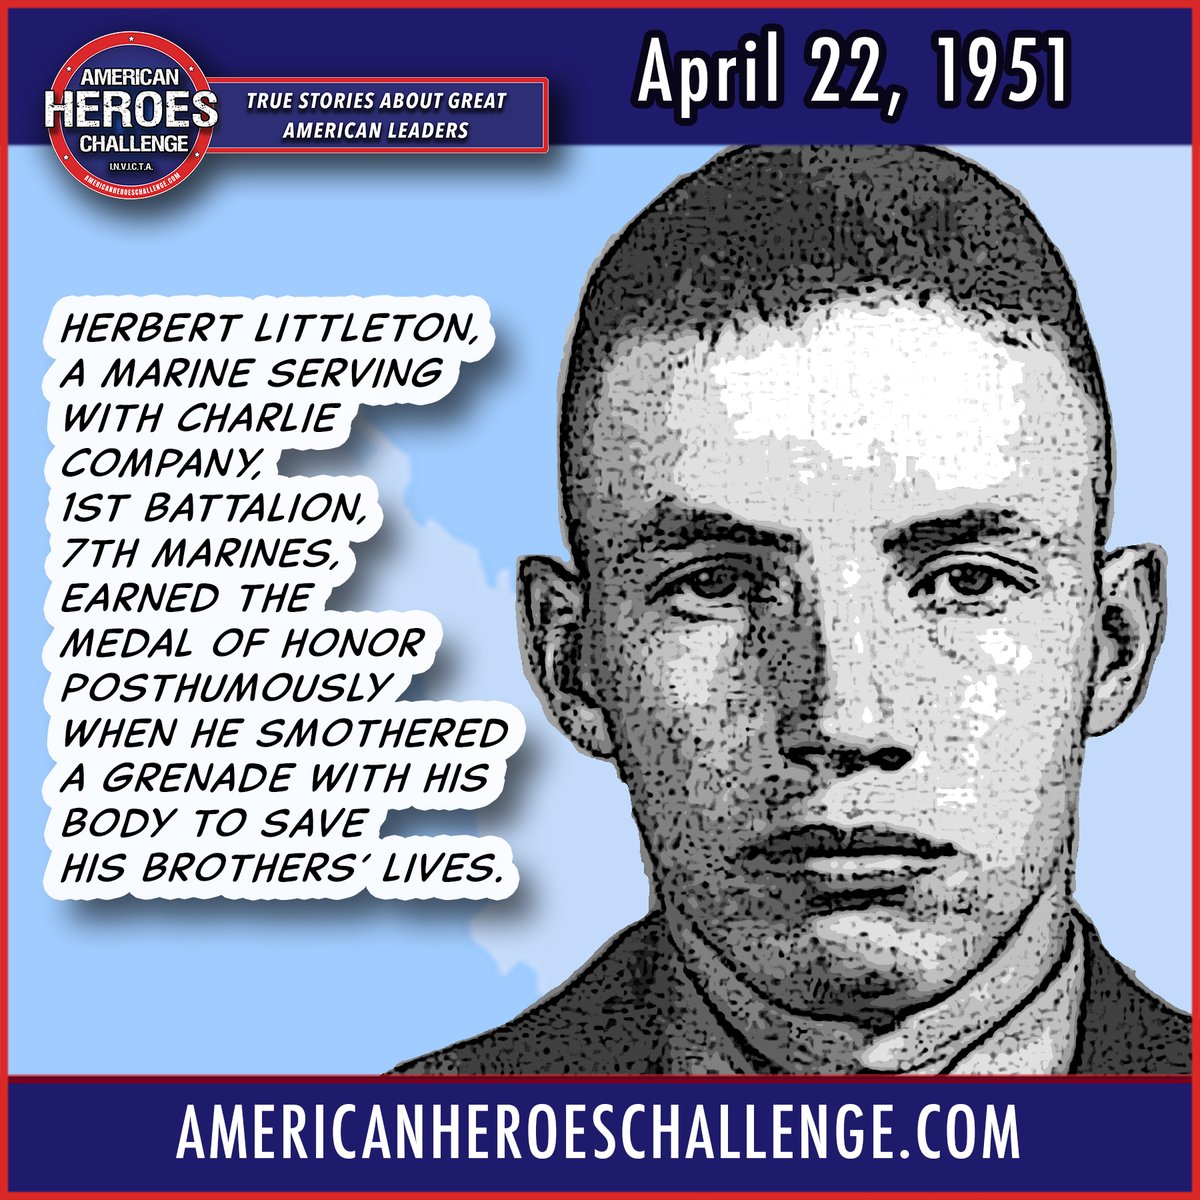 Herbert Littleton, a Marine serving with Charlie Company, 1st Battalion, 7th Marines, earned the Medal of Honor posthumously when he smothered a grenade with his body to save his brothers' lives. Honor and remember!